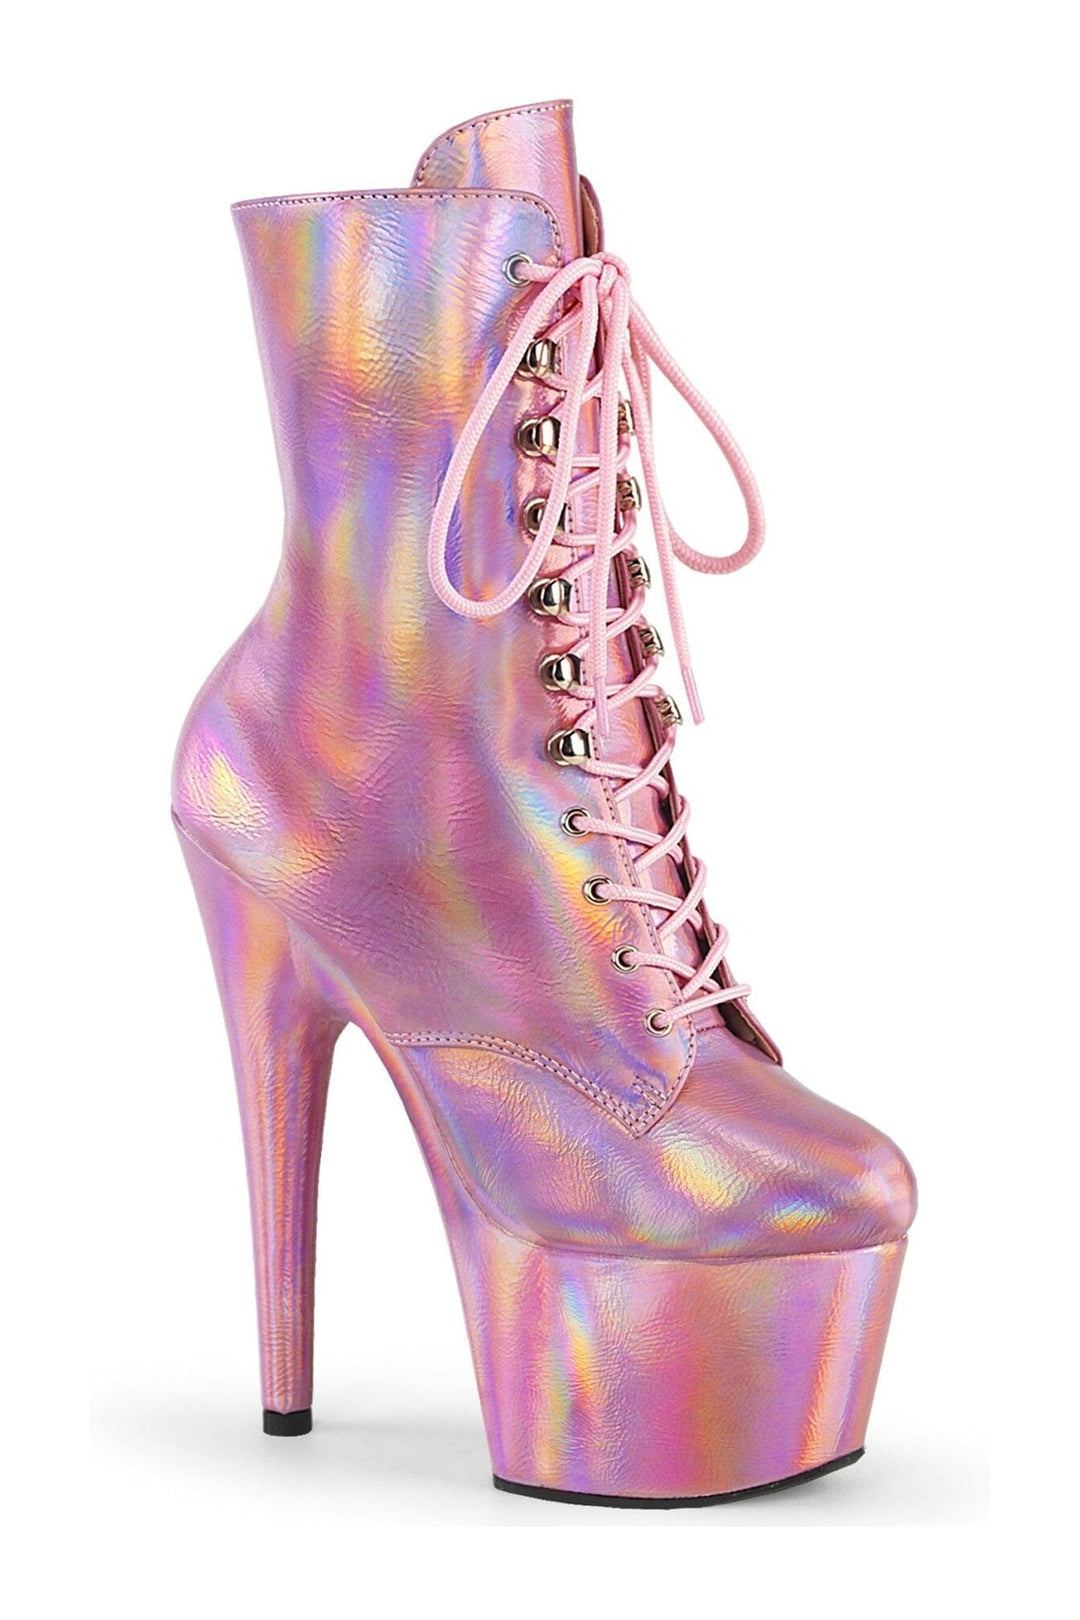 ADORE-1020HG Pink Hologram Ankle Boot-Ankle Boots-Pleaser-Pink-10-Hologram-SEXYSHOES.COM